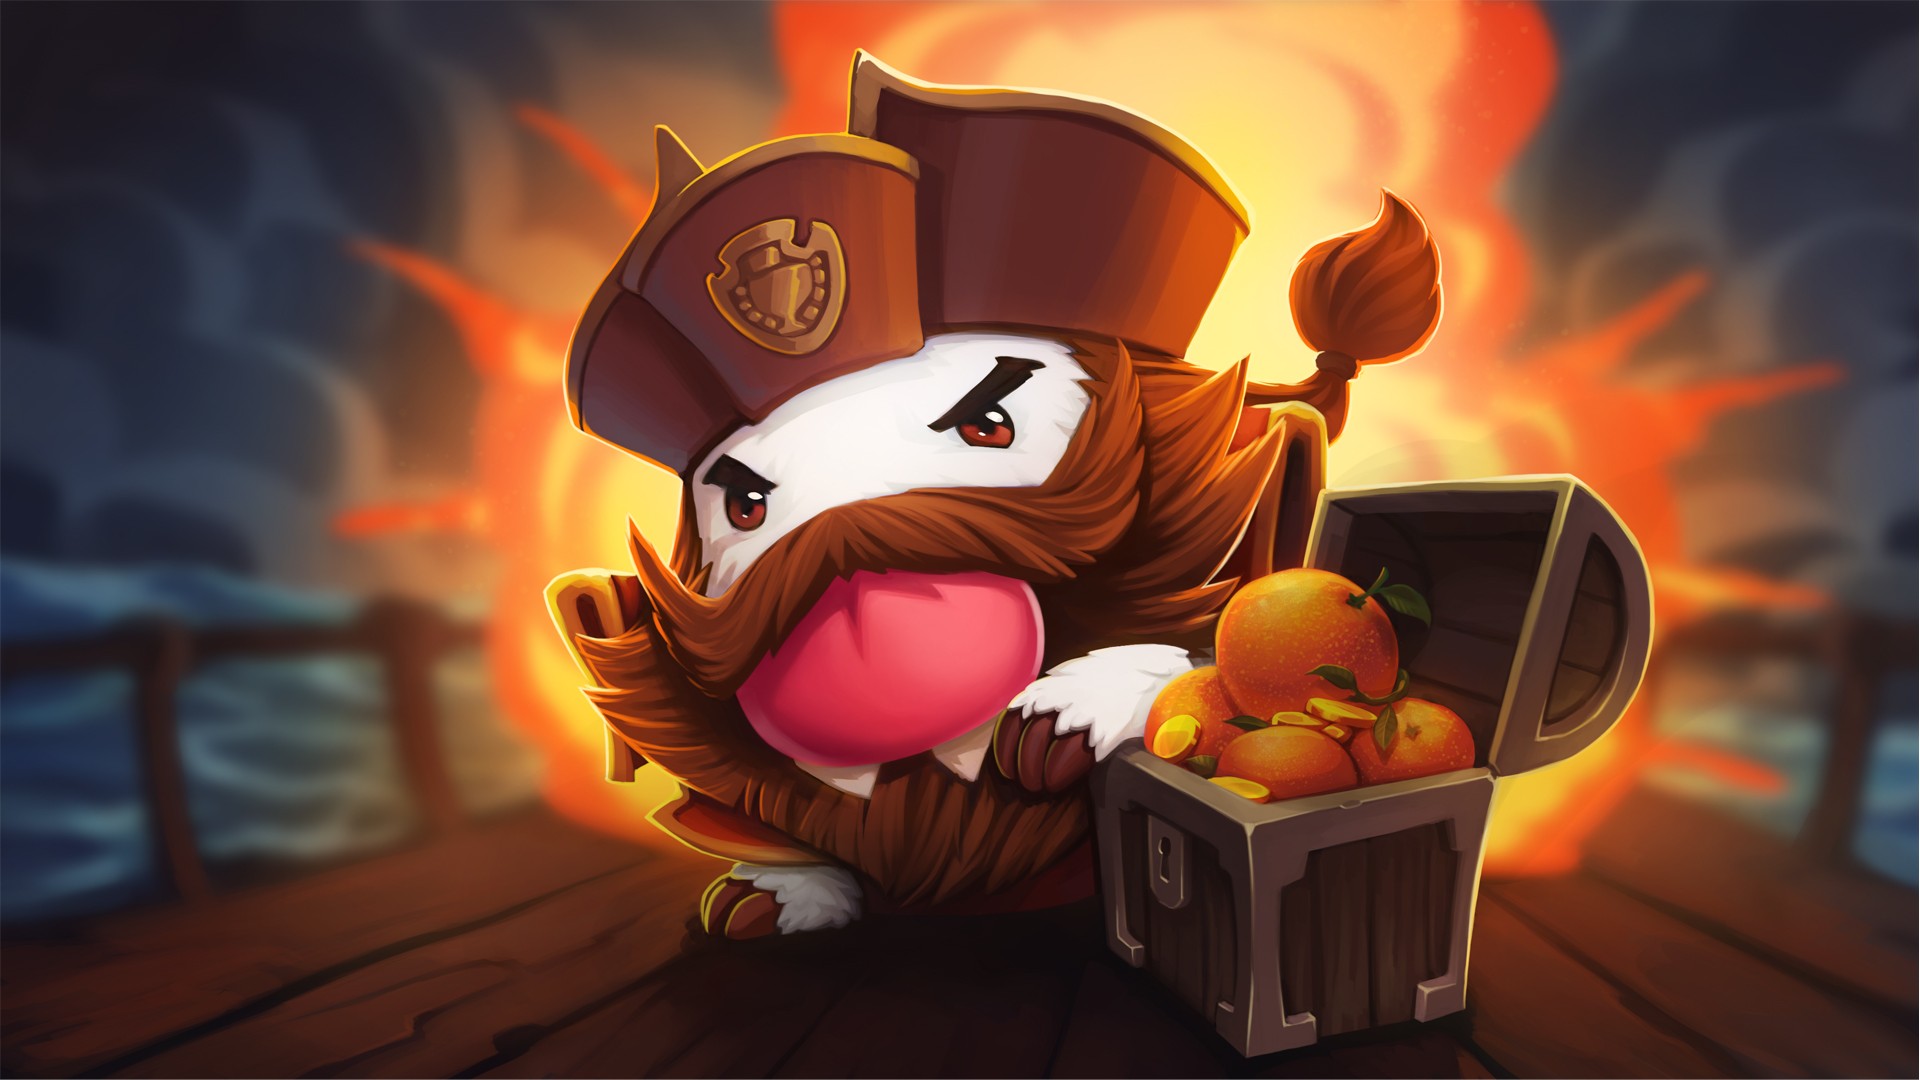 General 1920x1080 League of Legends Gangplank (League of Legends) PC gaming orange (fruit) fruit treasure pirates video game characters video game art Poro (League of Legends)